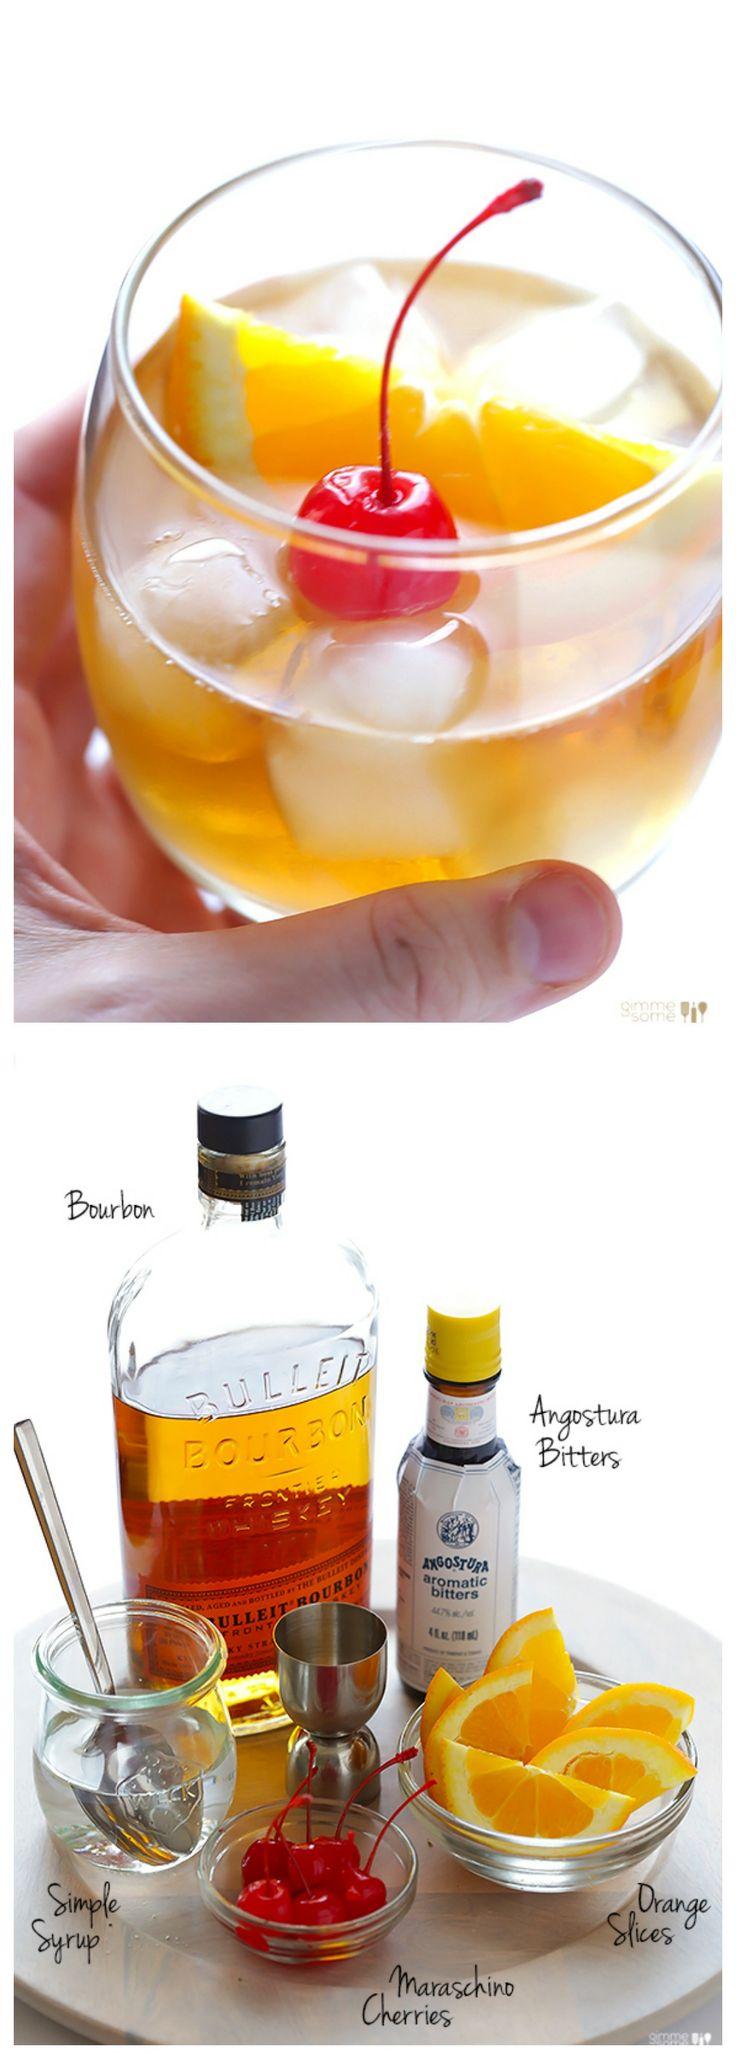 Wedding - Old Fashioned Cocktail